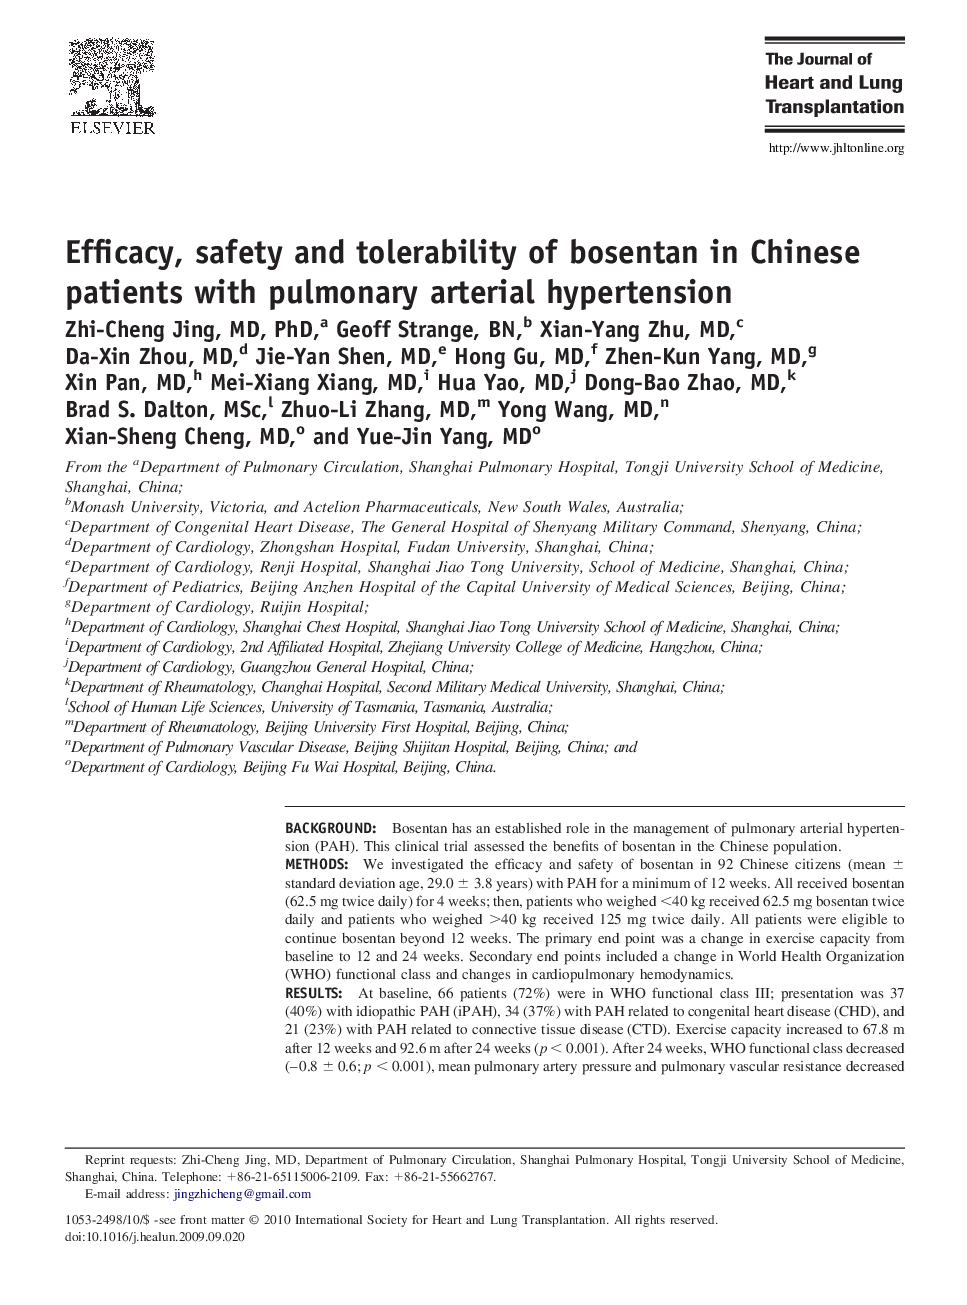 Efficacy, safety and tolerability of bosentan in Chinese patients with pulmonary arterial hypertension